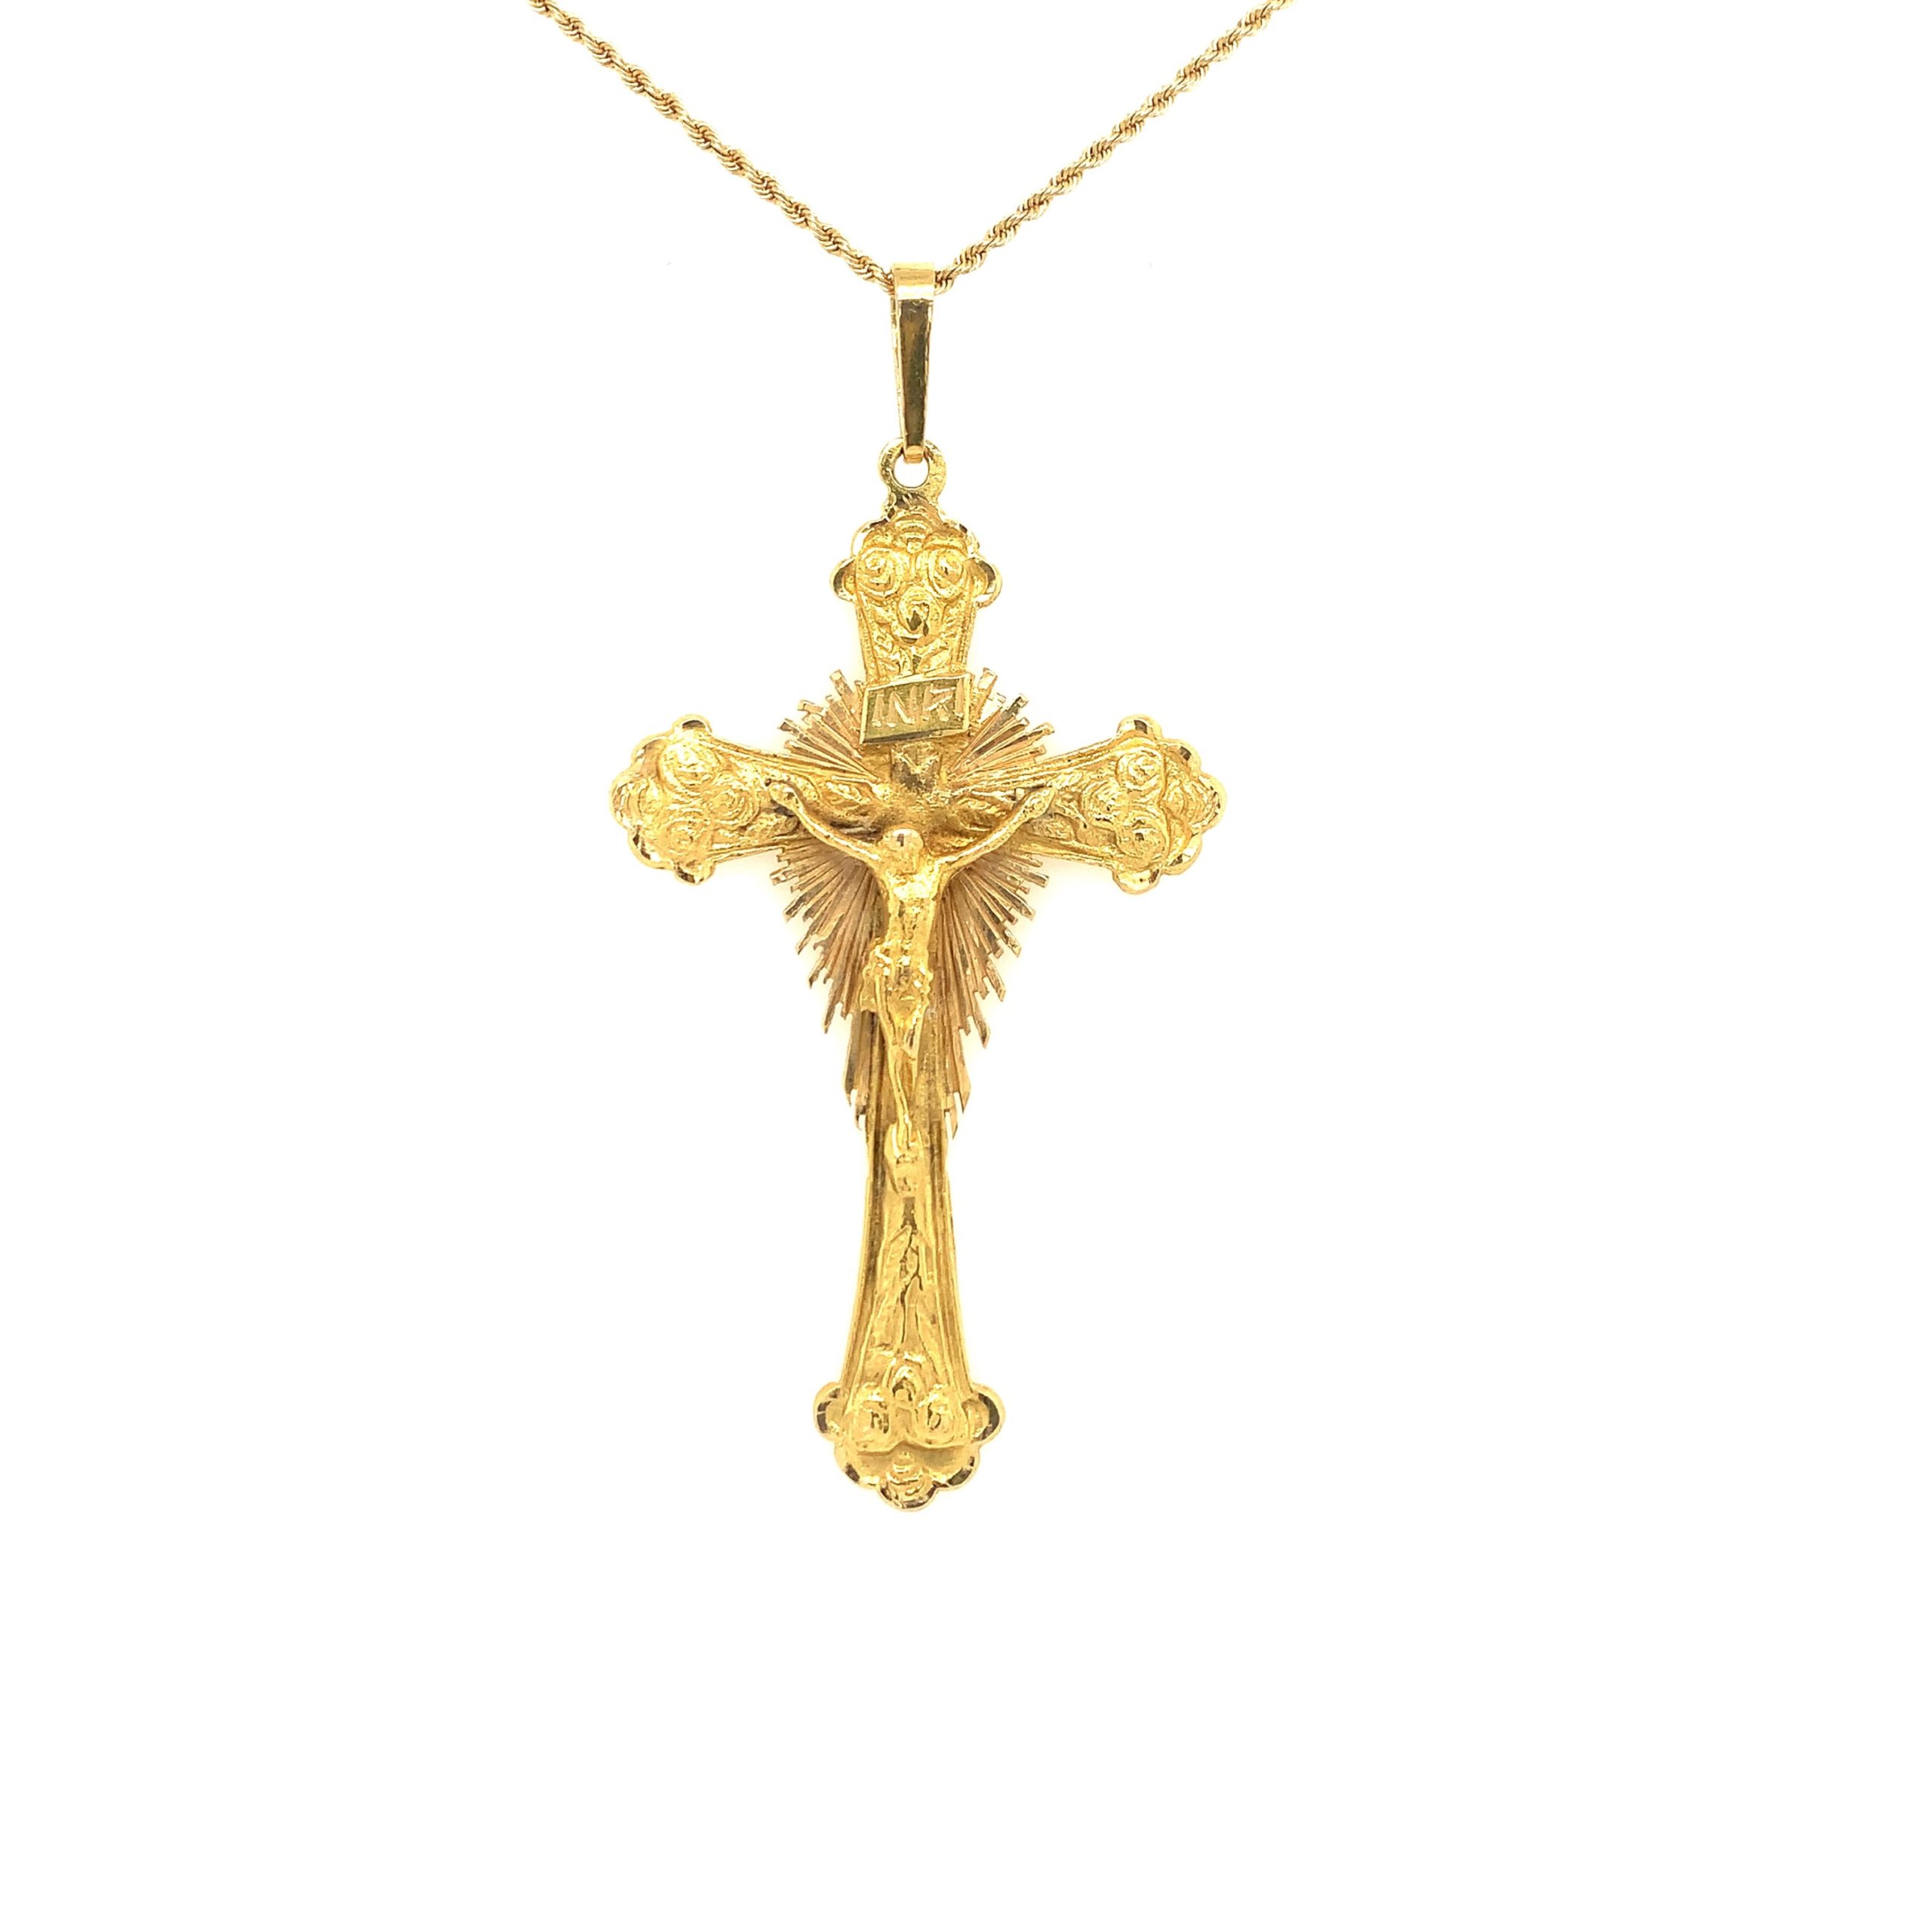 Estate: Yellow Gold Crucifix Necklace